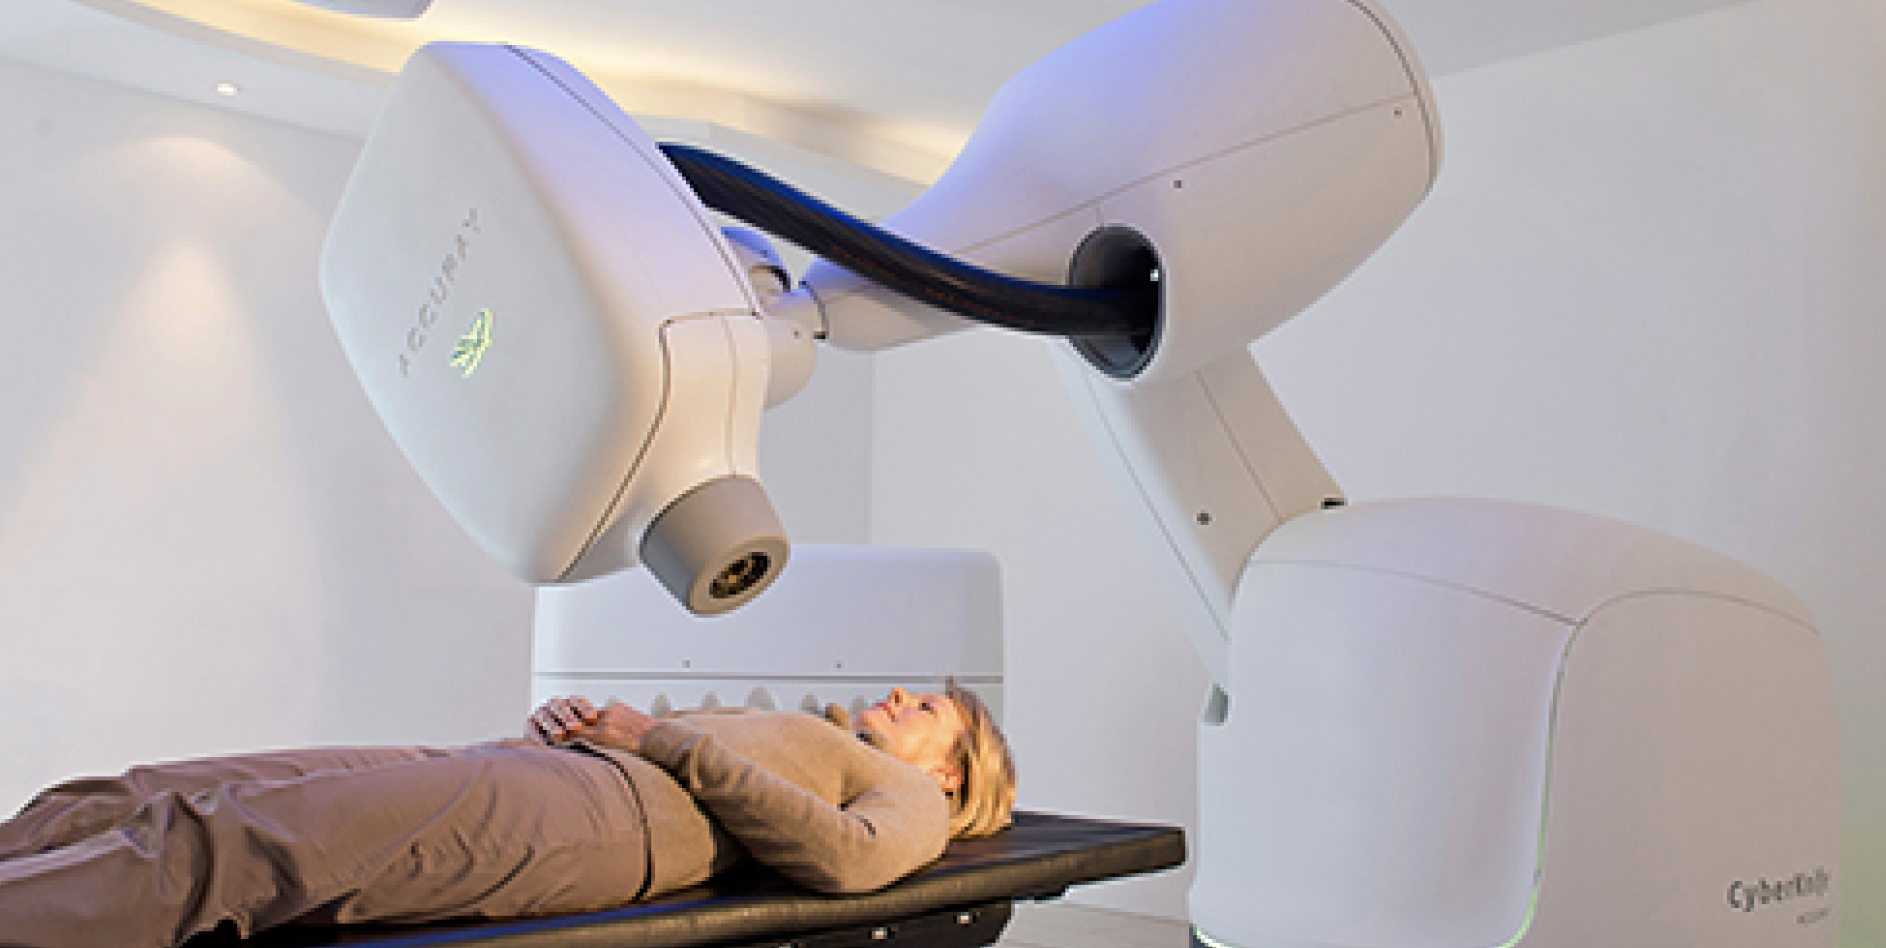 1 dose of CyberKnife - cyberknife miami - cancer treatment center in south florida - cyberknife more effective than conventional radiation